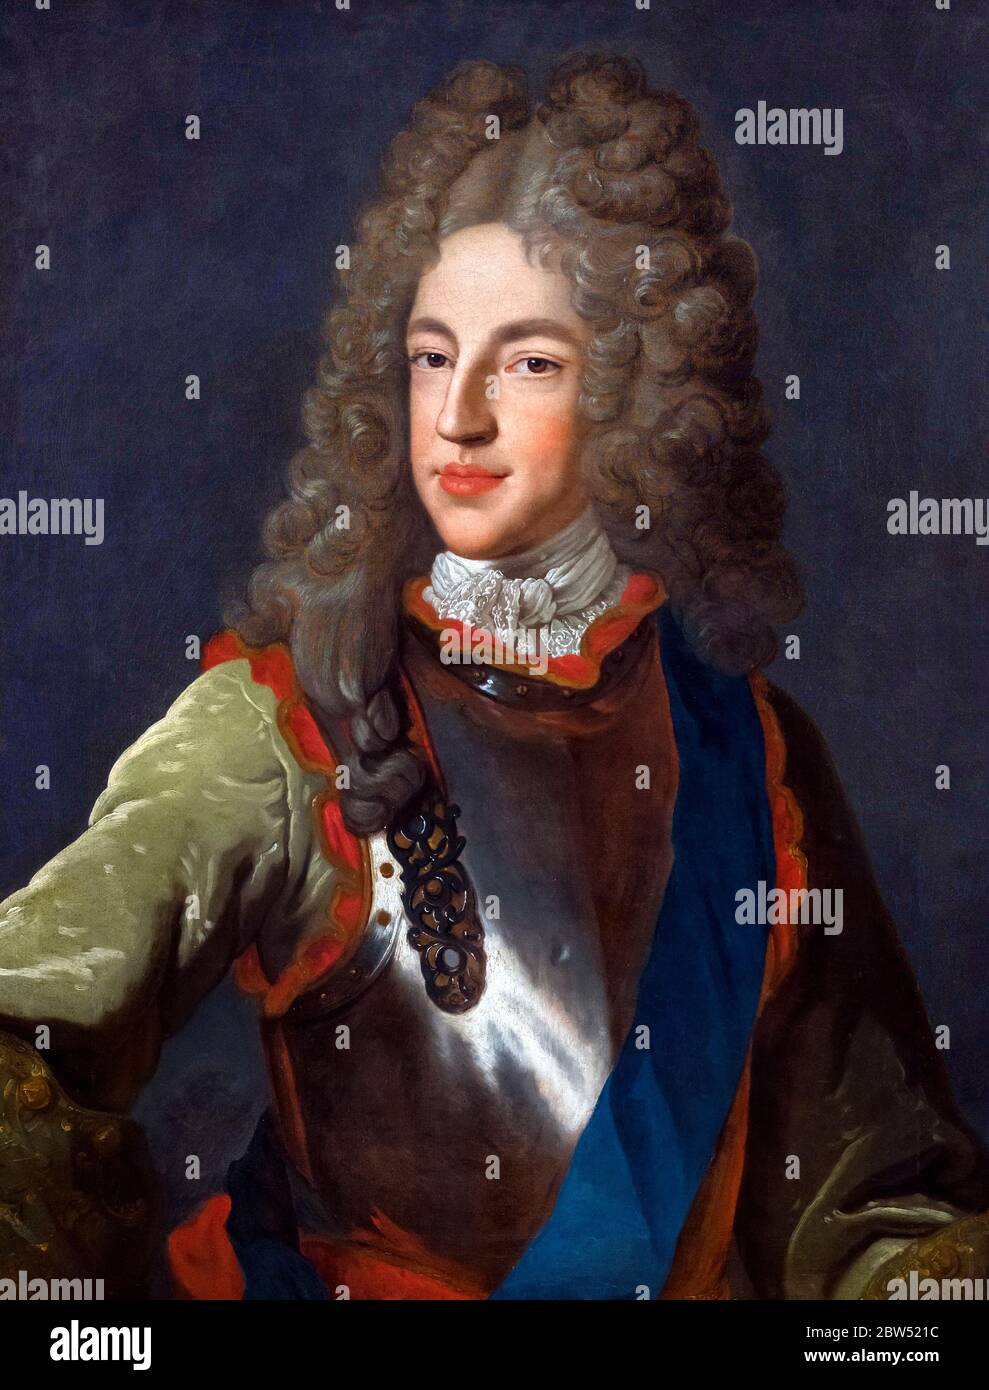 Prince James Francis Edward Stuart (1688-1766), the Old Pretender, who made claims to the thrones of England and Scotland as James III and VIII. Portrait by Alexis Simon Belle, oil on canvas, c.1712 Stock Photo